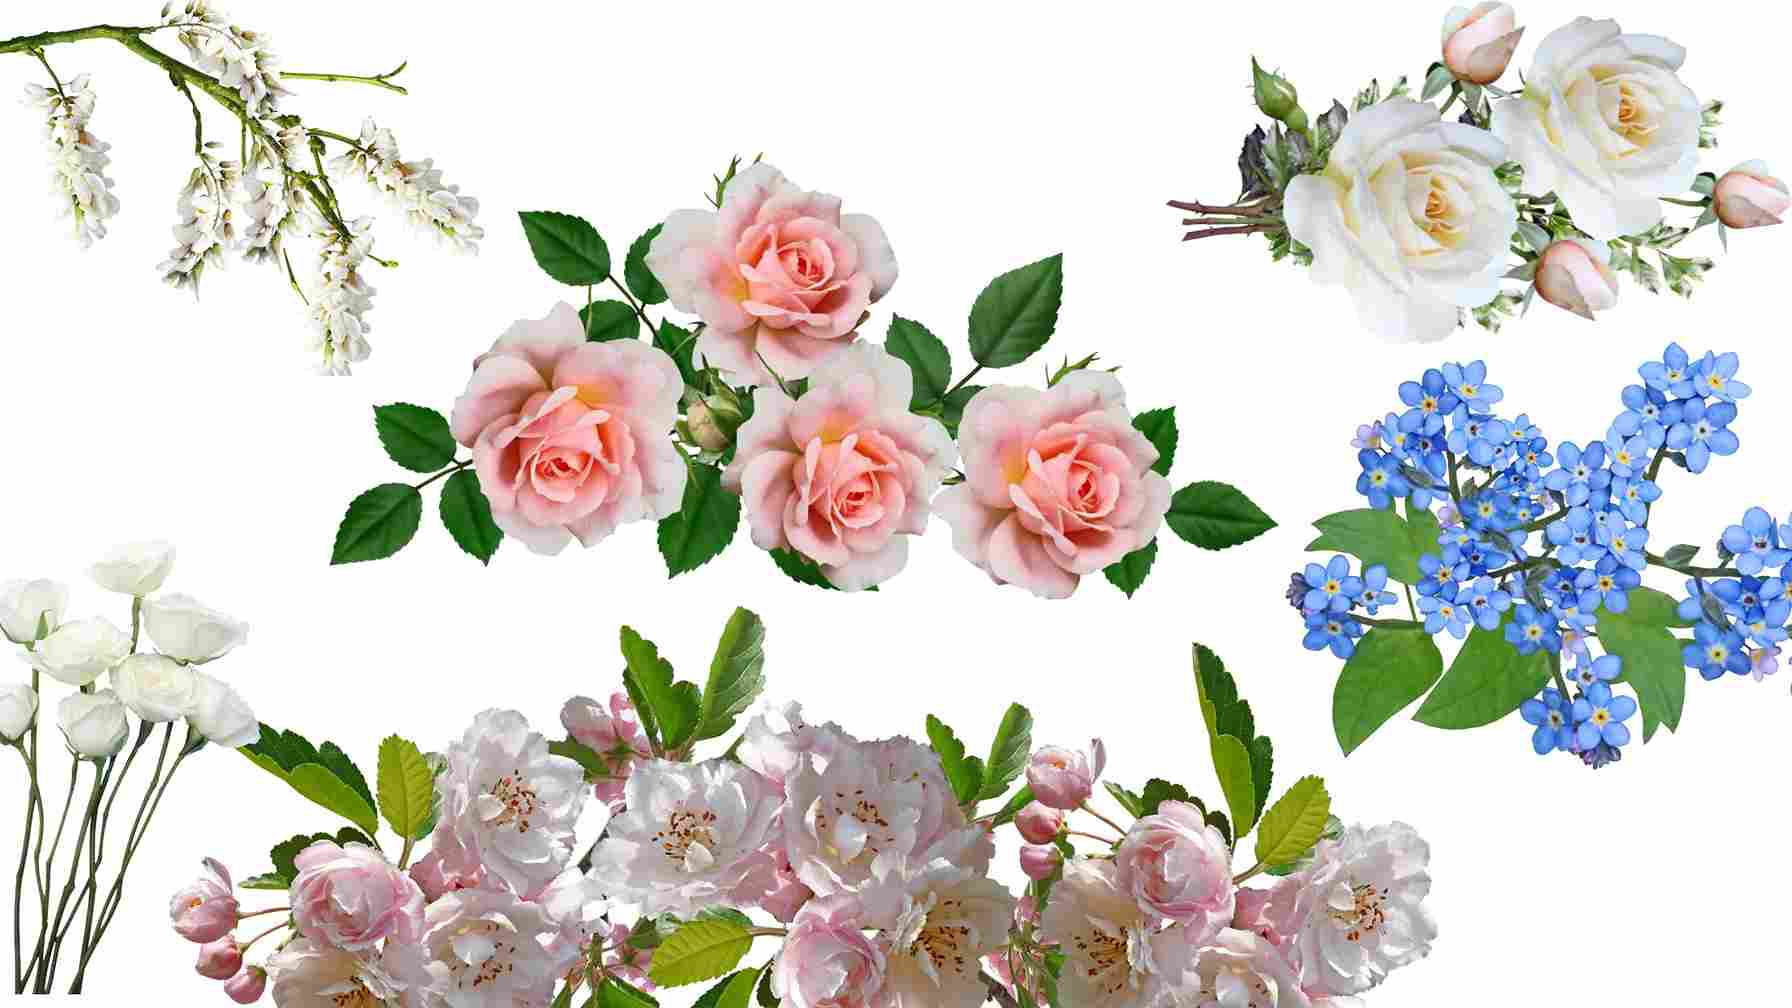 Spiritual Meaning of Smelling Flowers